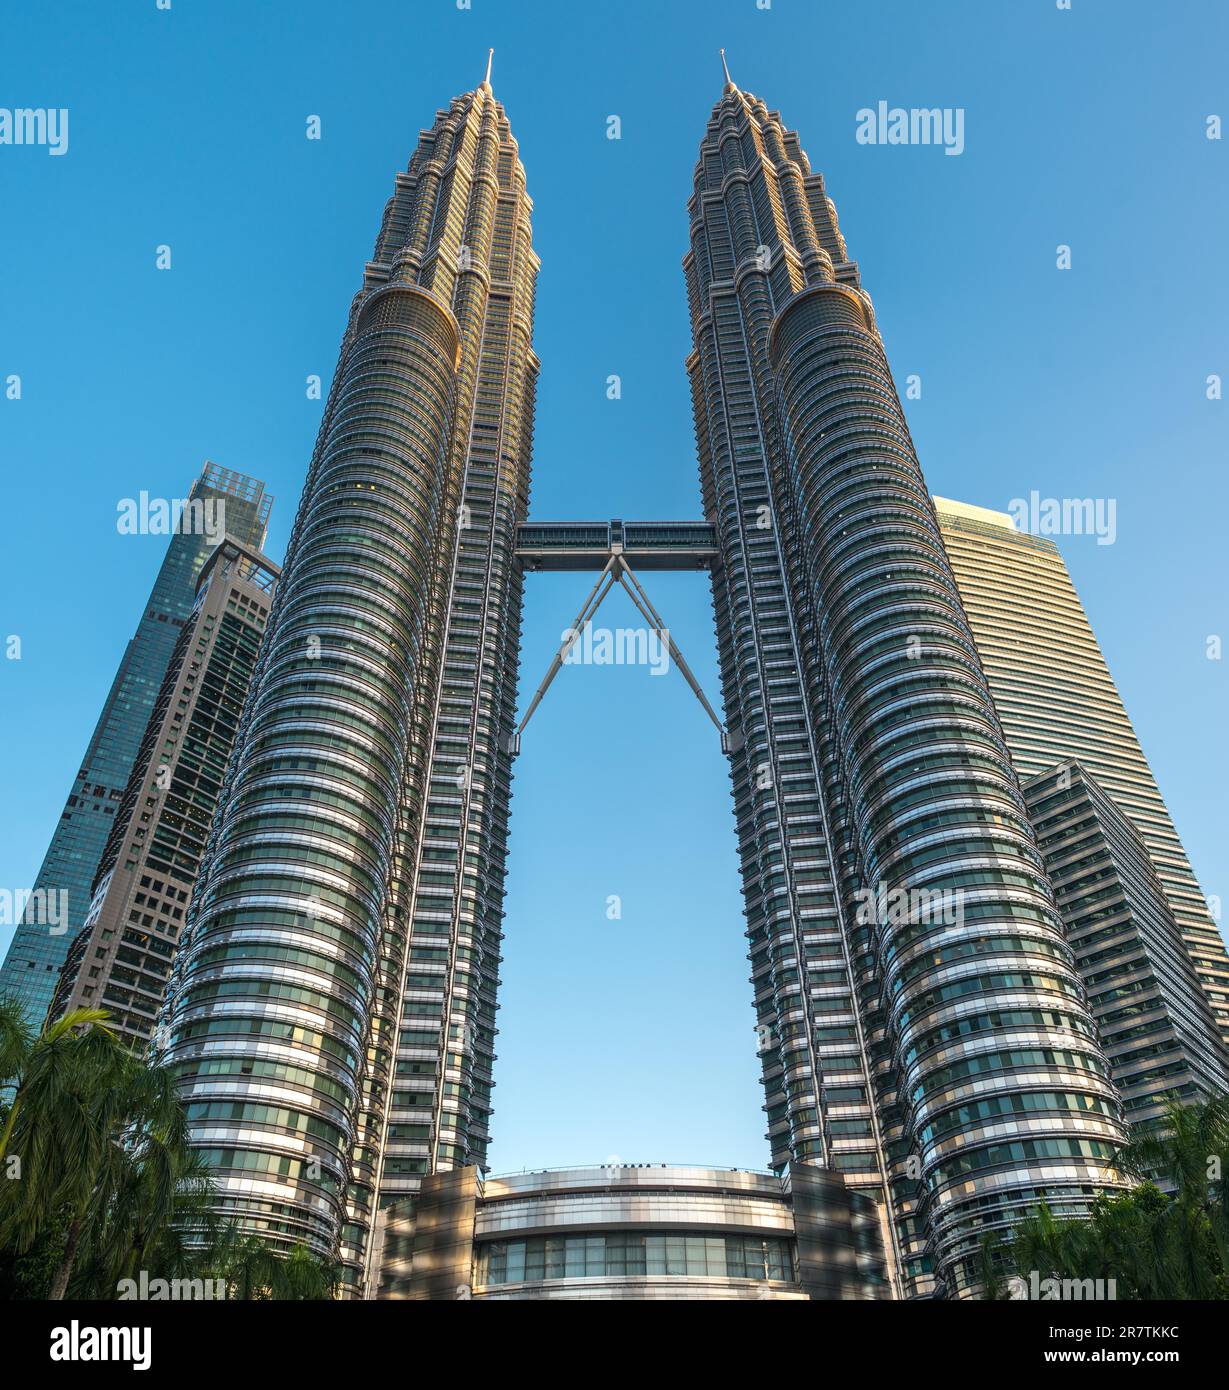 The Petronas Twin Towers are the main attraction and a landmark in capital of Malaysia, Kuala Lumpur Stock Photo